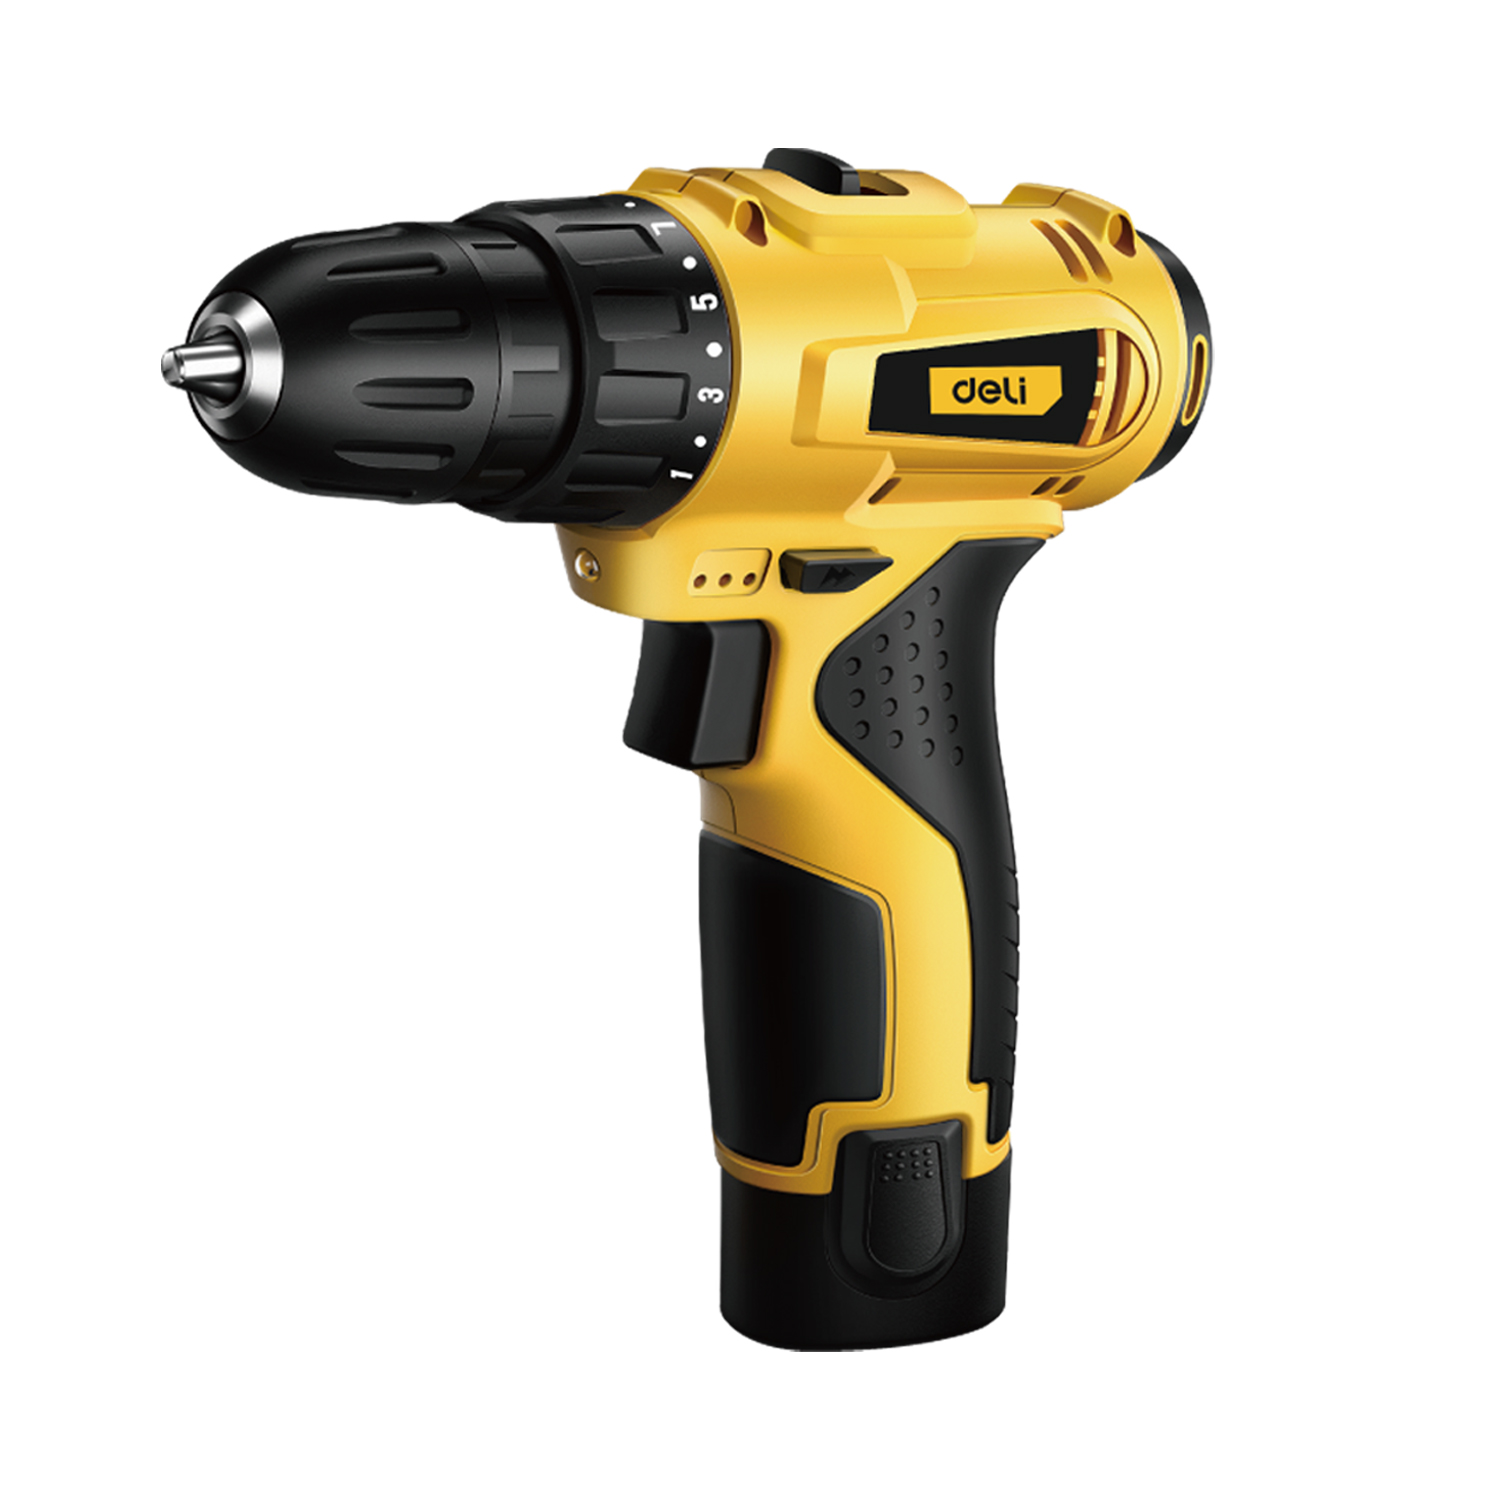 Variable Speed Homebase Cordless Drill for drilling